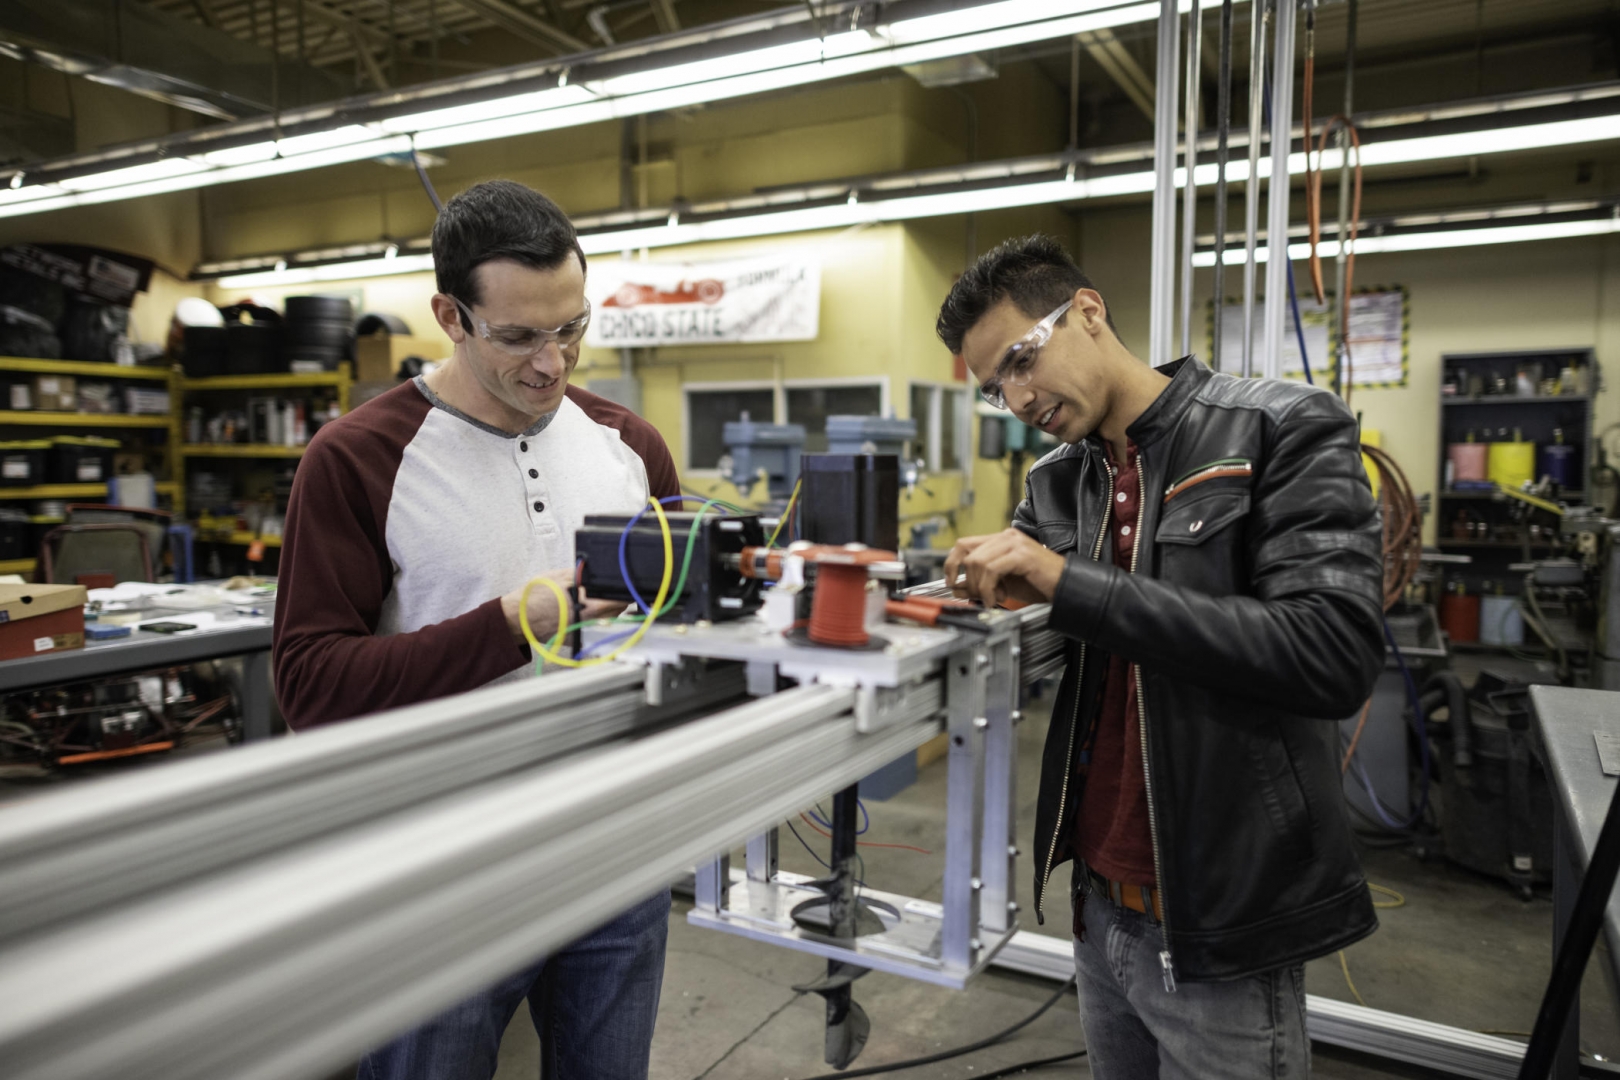 Two students work on their large-scale 3-D printer that will build homes out of concrete.